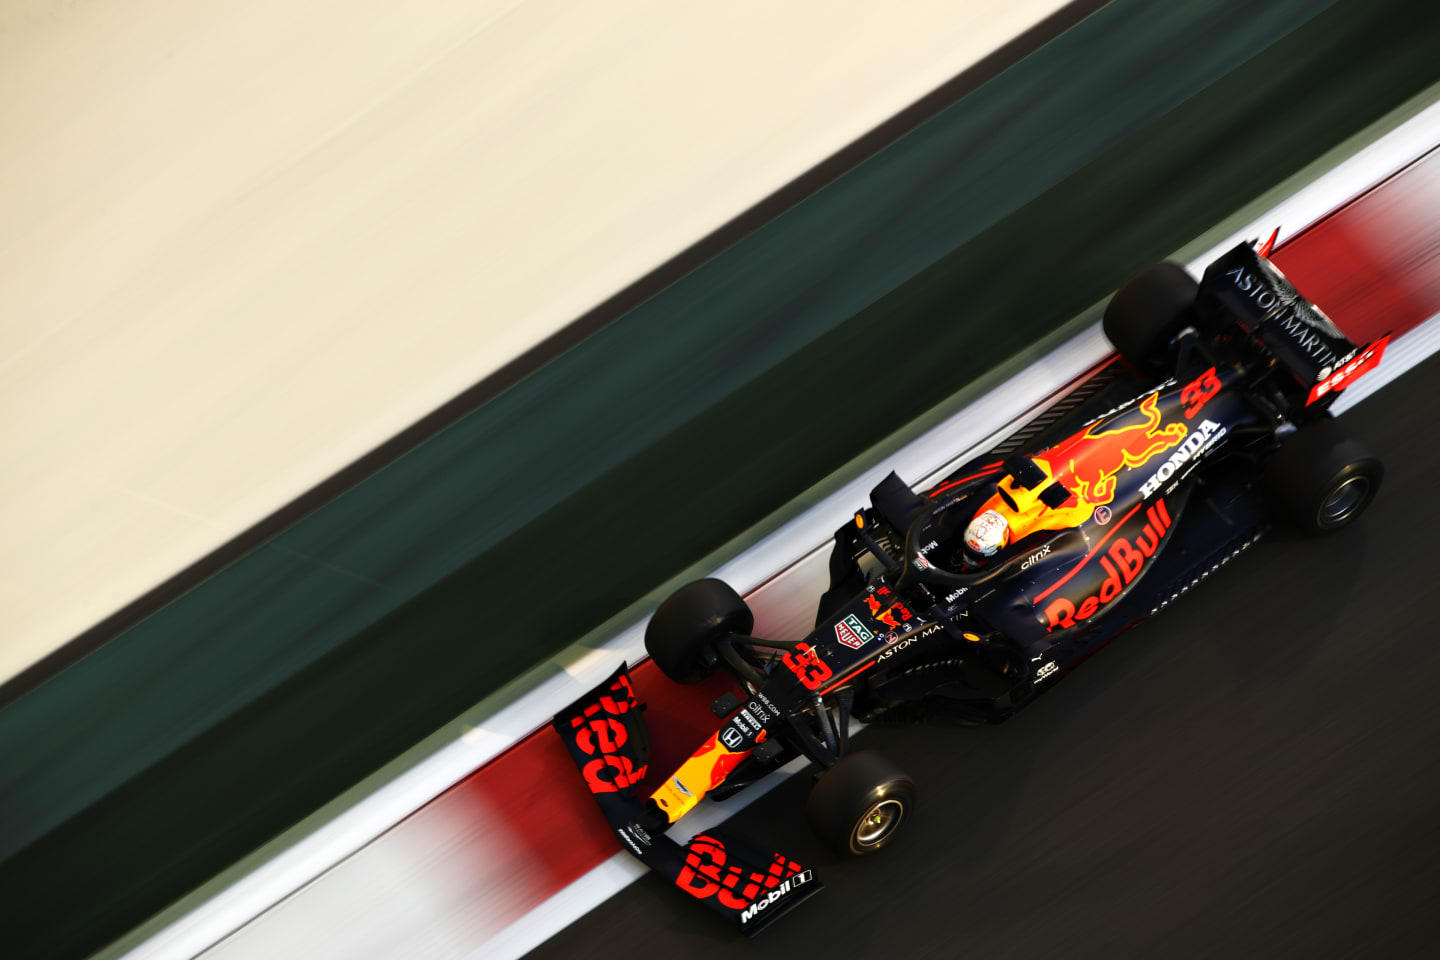 ABU DHABI, UNITED ARAB EMIRATES - DECEMBER 11: Max Verstappen of the Netherlands driving the (33) Aston Martin Red Bull Racing RB16 during practice ahead of the F1 Grand Prix of Abu Dhabi at Yas Marina Circuit on December 11, 2020 in Abu Dhabi, United Arab Emirates. (Photo by Mark Thompson/Getty Images)